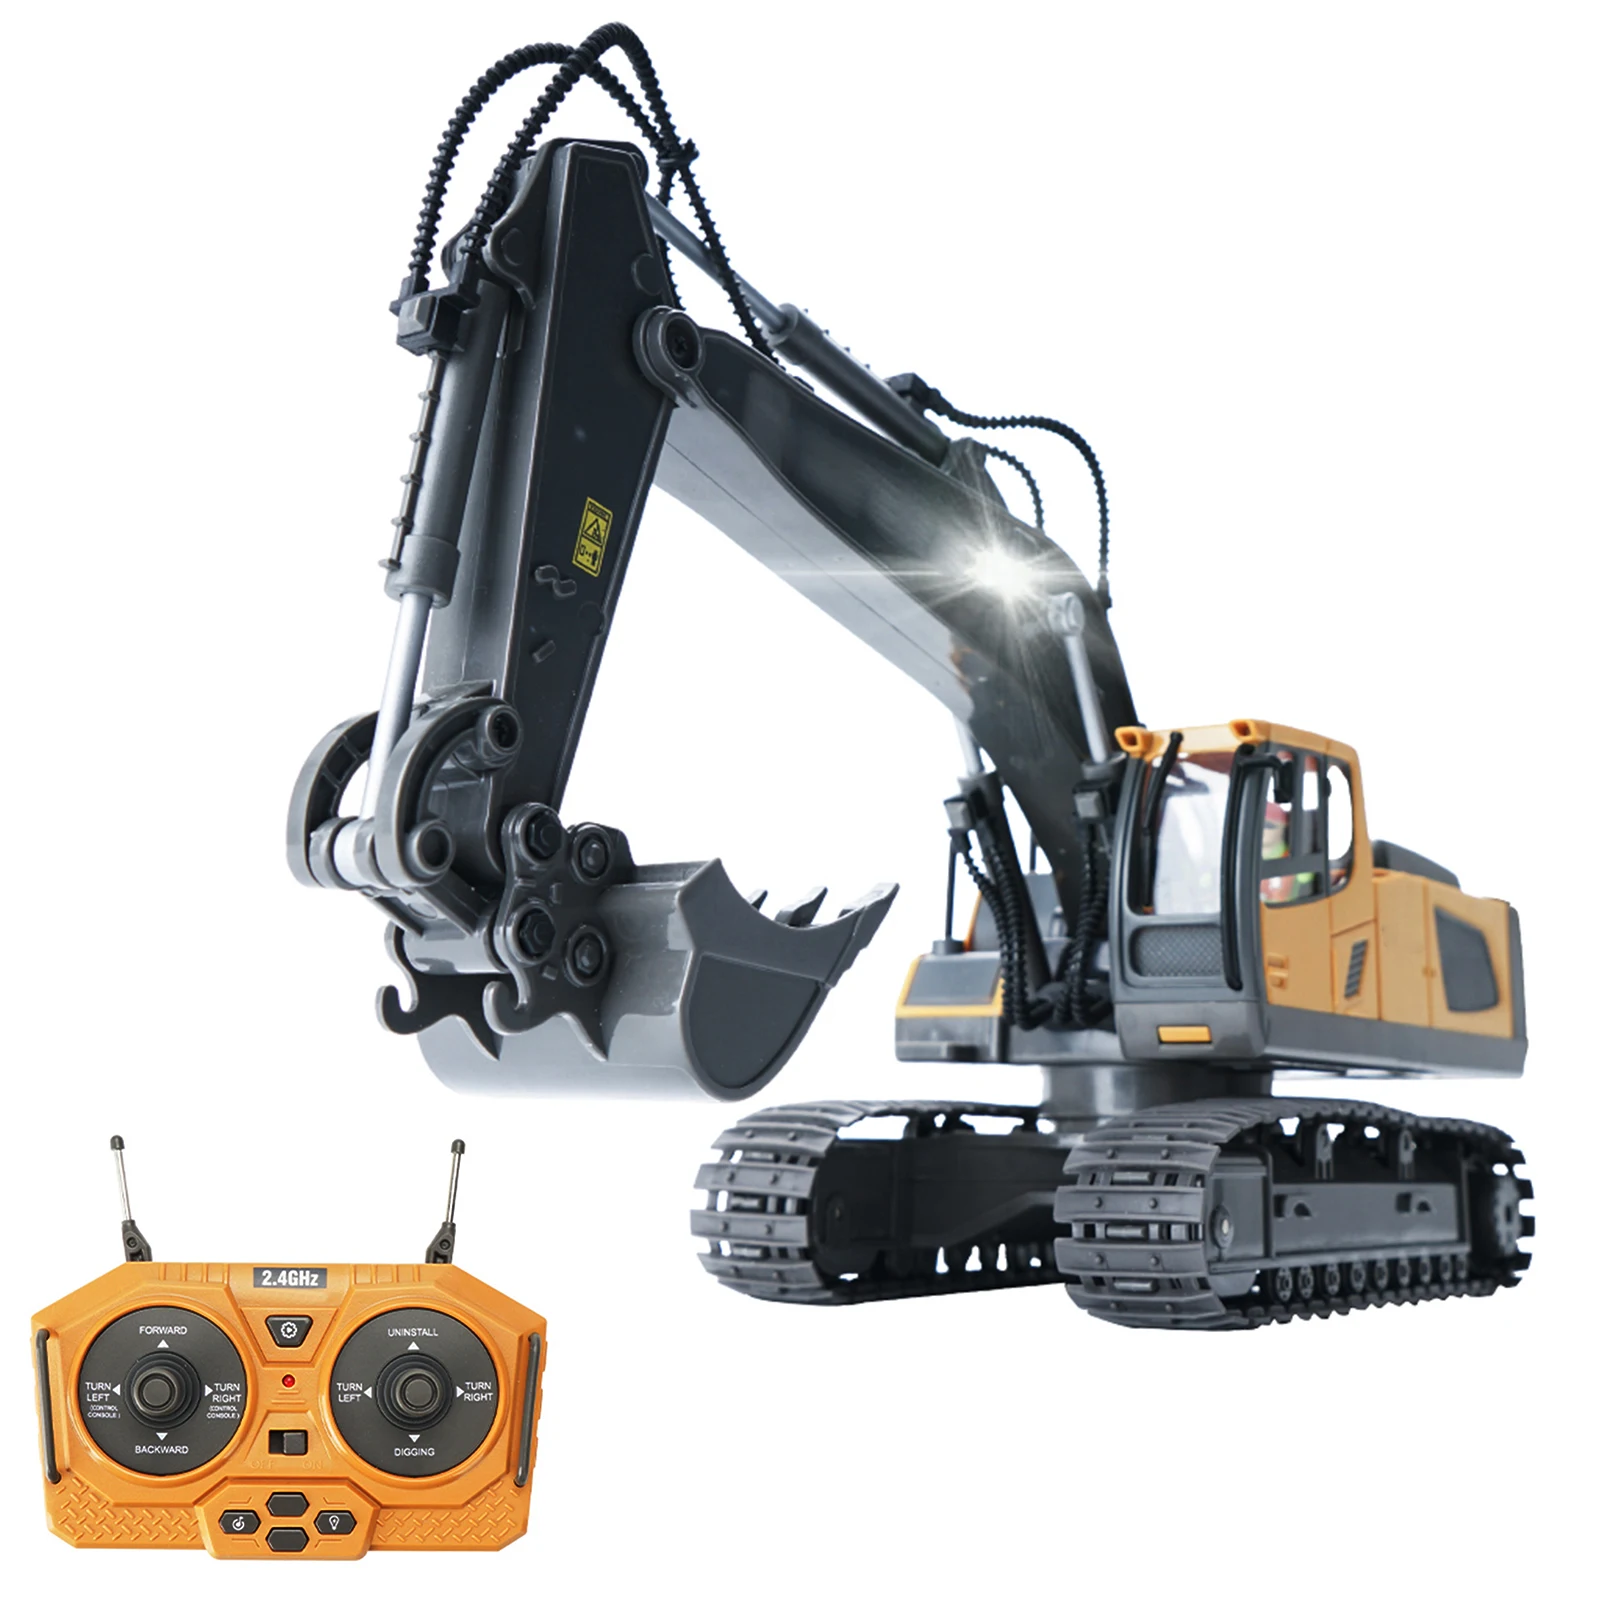 

2.4G High Tech 11 Channels RC Excavator Dump Trucks Bulldozer Alloy Plastic Engineering Vehicle Electronic Toys For Boy Gifts